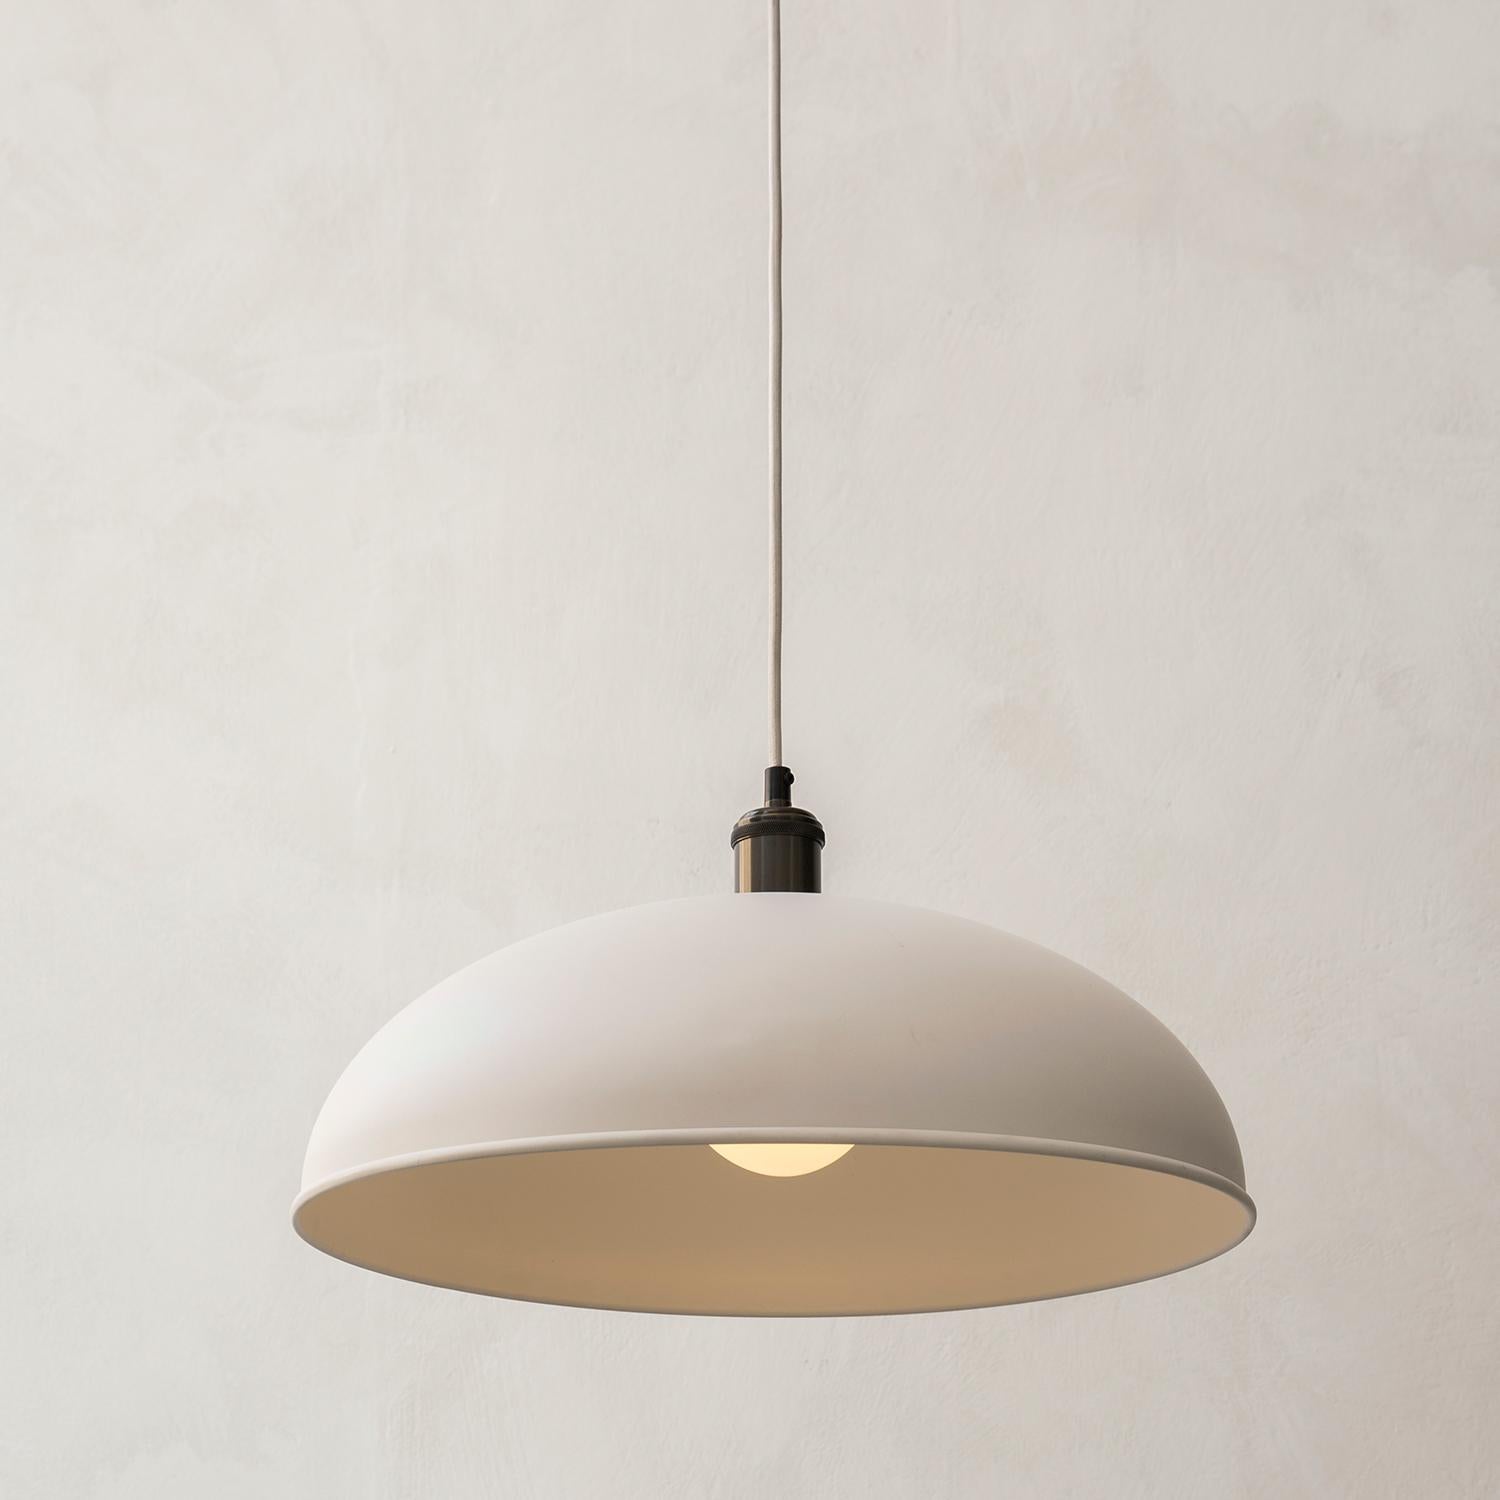 The Hubert Series was conceived by New York City-based design firm Søren Rose Studio. The functional frame, simple lines, and warming brass interior create a light that is at once unobtrusive and beautiful.

An off-shoot of the beloved Tribeca